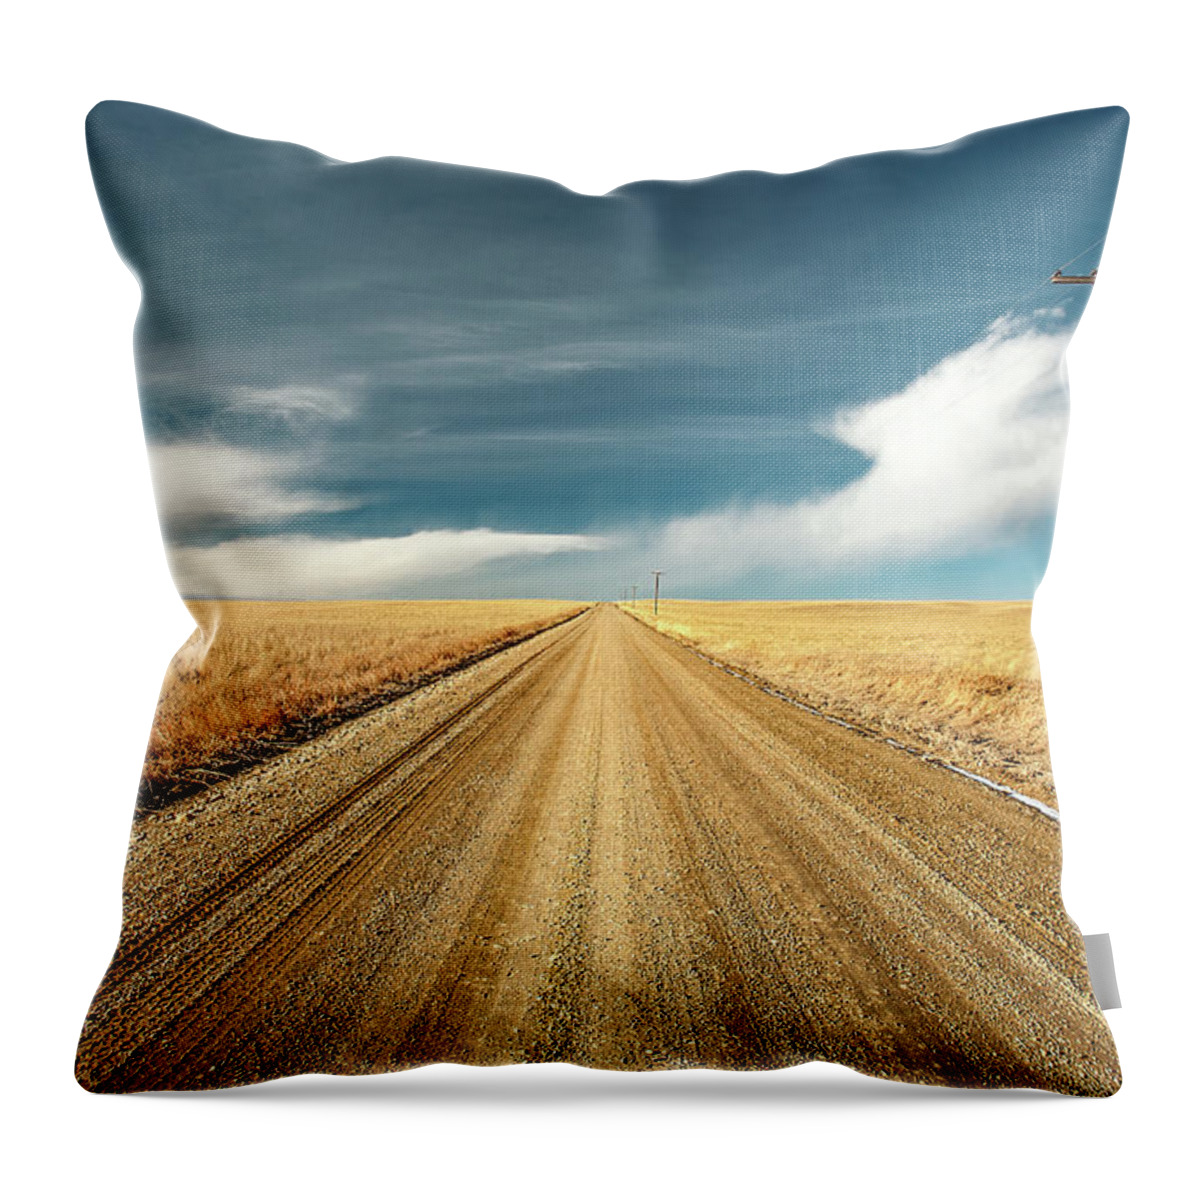 Landscape Throw Pillow featuring the photograph Gravel Lines by Todd Klassy